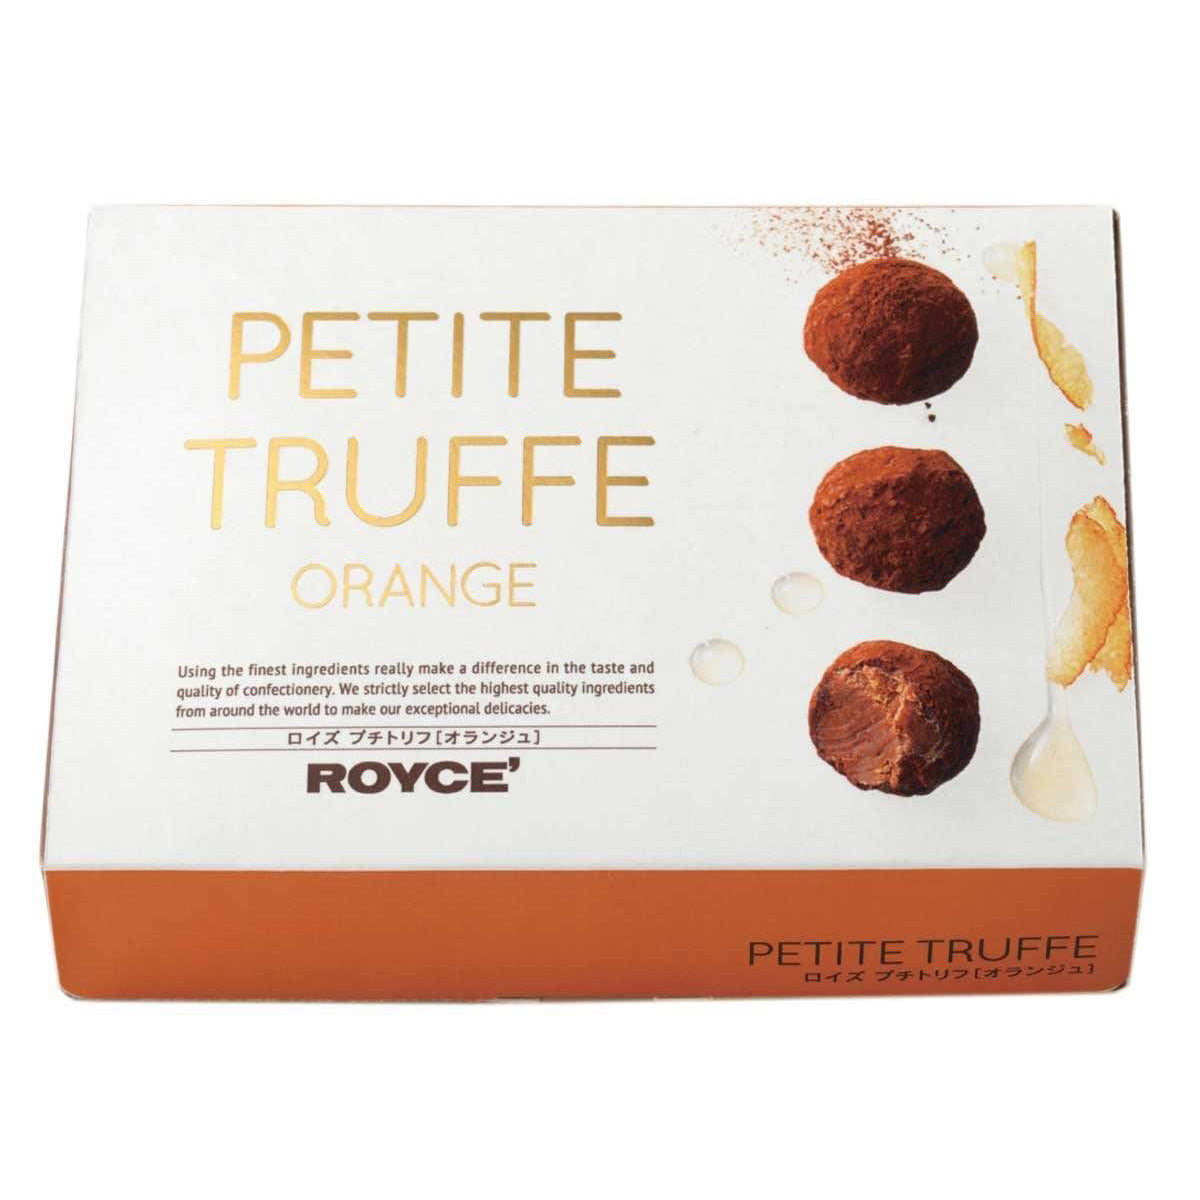 ROYCE' Chocolate - Petite Truffe "Orange" - Image shows a box in white and orange with pictures of brown chocolate balls in the right. Text says Petite Truffe Orange Using the finest ingredients really make a difference in the taste and quality of confectionery. We strictly select the highest quality ingredients from around the world to make our exceptional delicacies. ROYCE'. Petite Truffe.